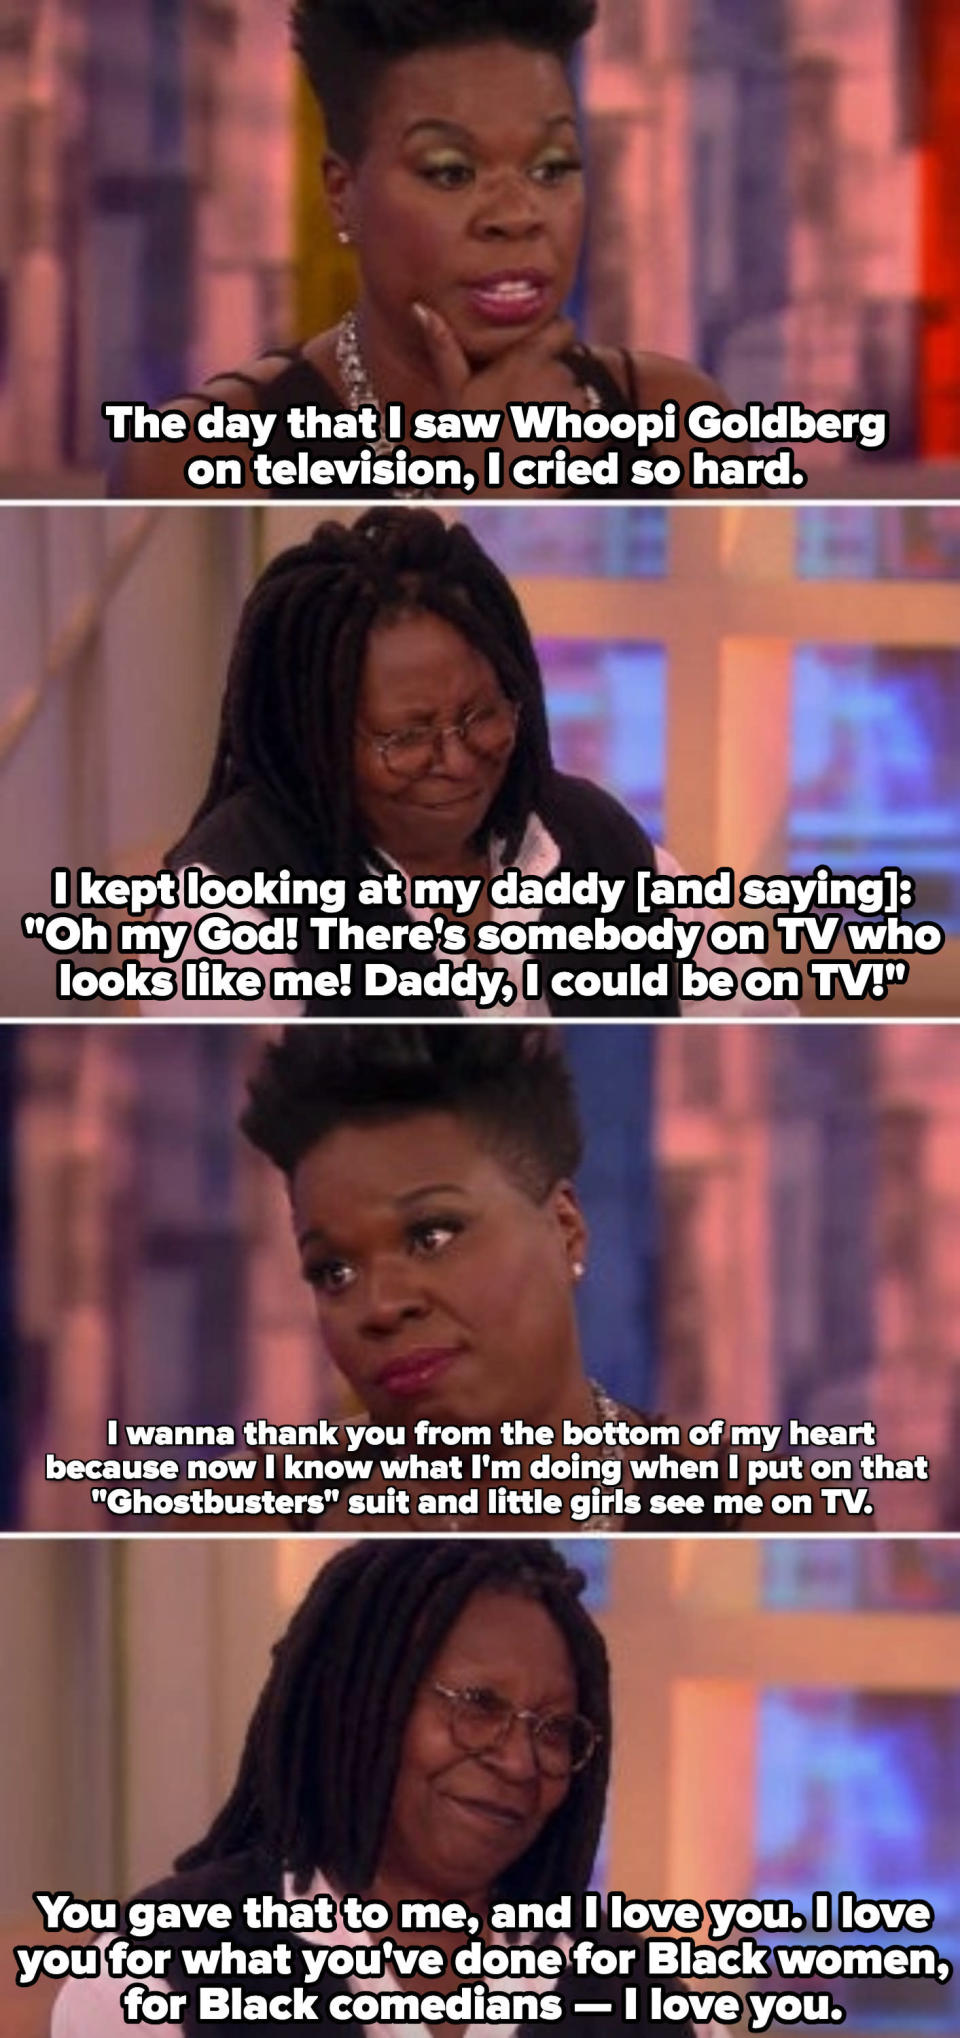 Leslie Jones telling Whoopi: &quot;I wanna thank you from the bottom of my heart because now I know what I&#39;m doing when I put on that &#39;Ghostbusters&#39; suit and little girls see me on TV&quot;